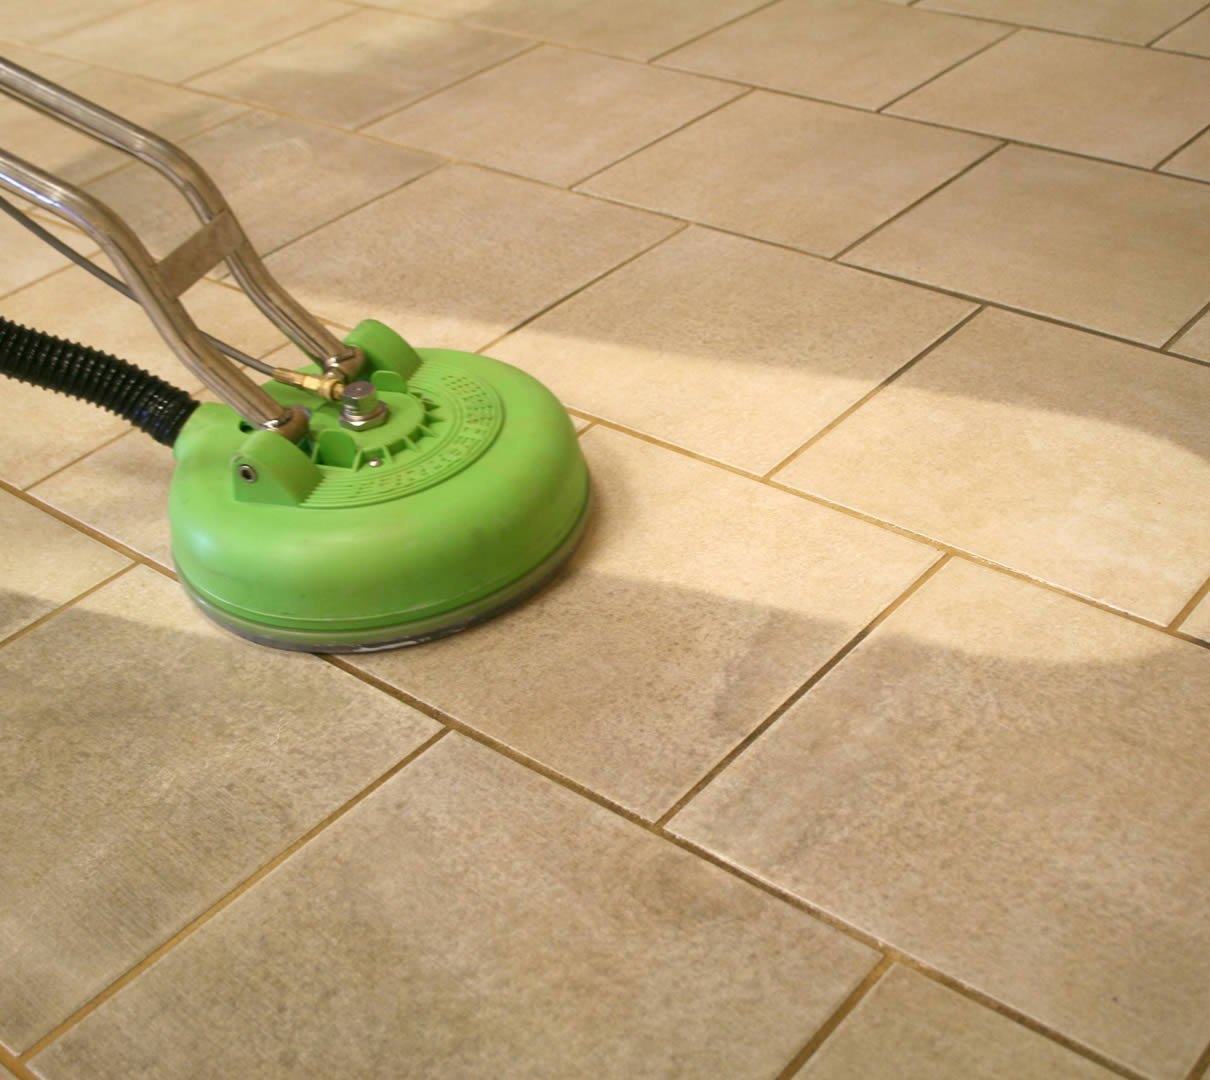 kirei tile and grout cleaning service